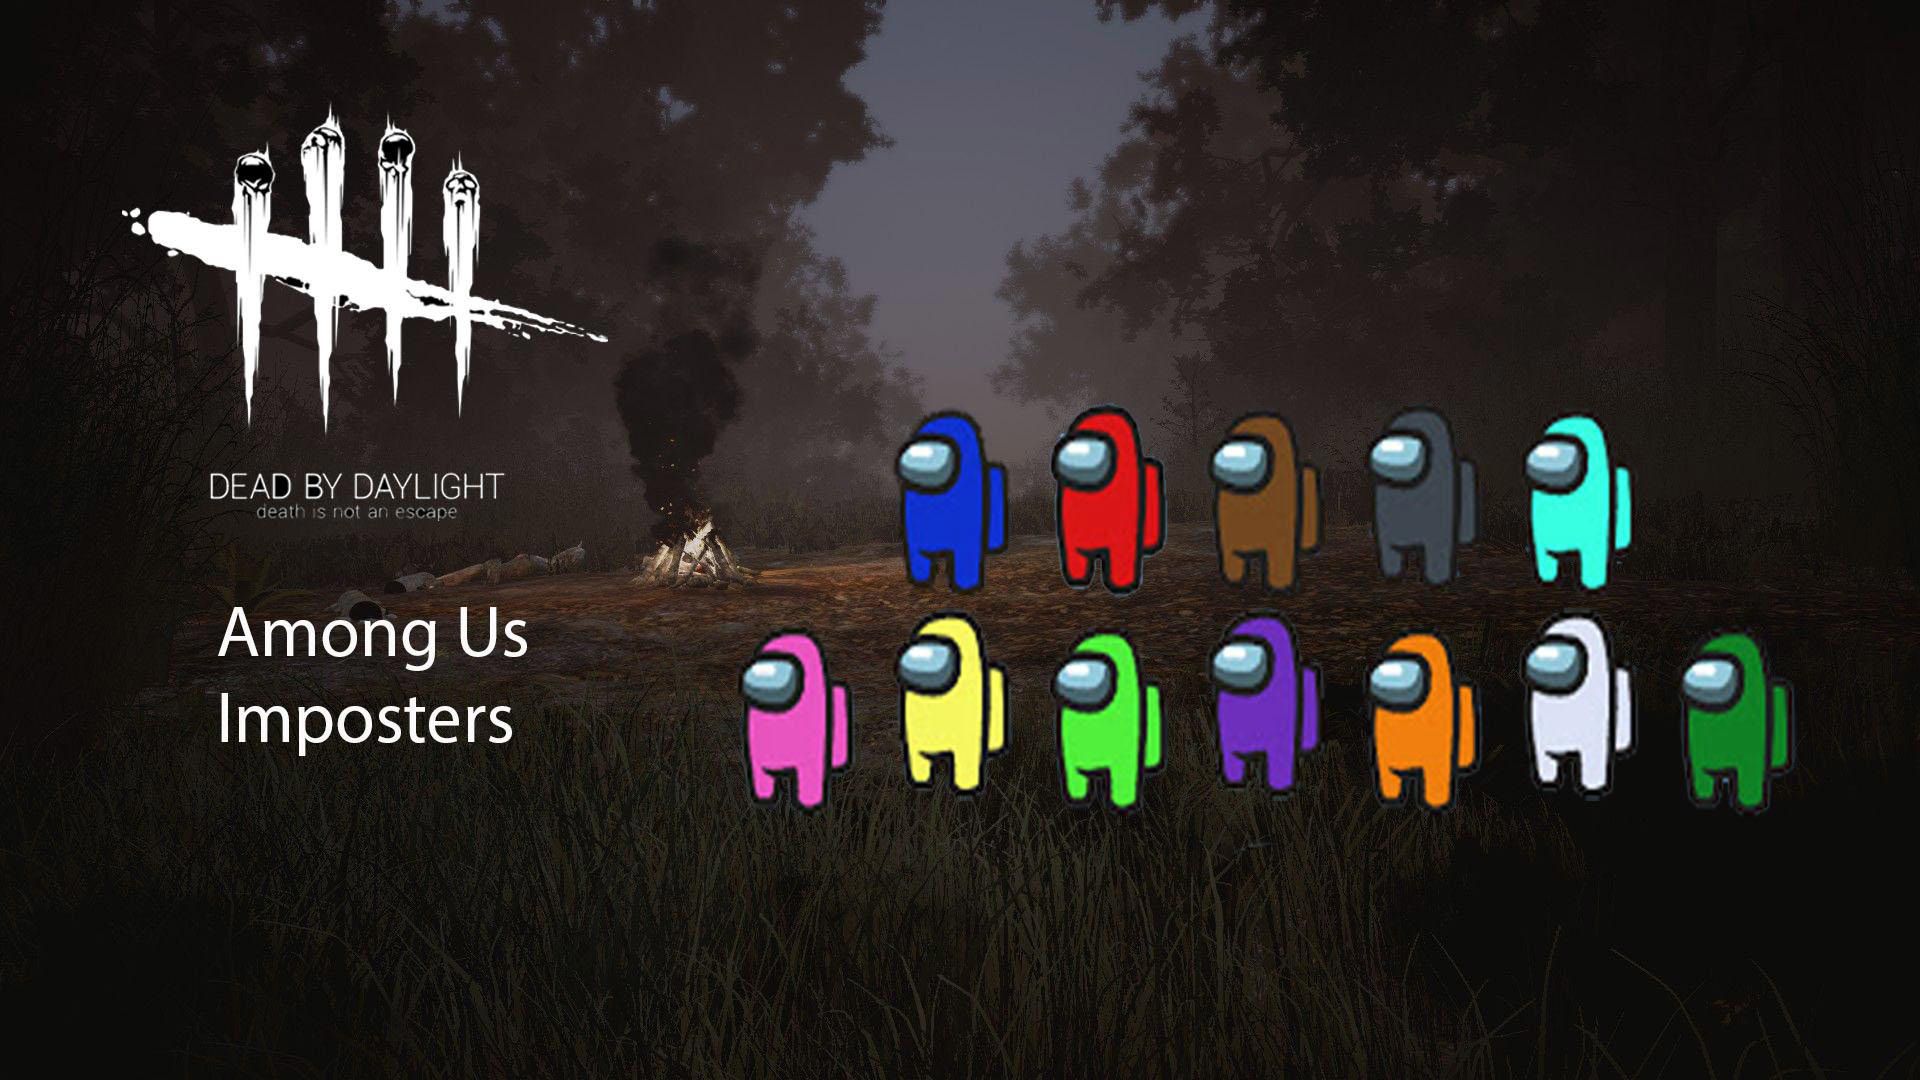 Among Us Imposters x Dead By Daylight 1080P Laptop Full HD Wallpaper, HD Games 4K Wallpaper, Image, Photo and Background